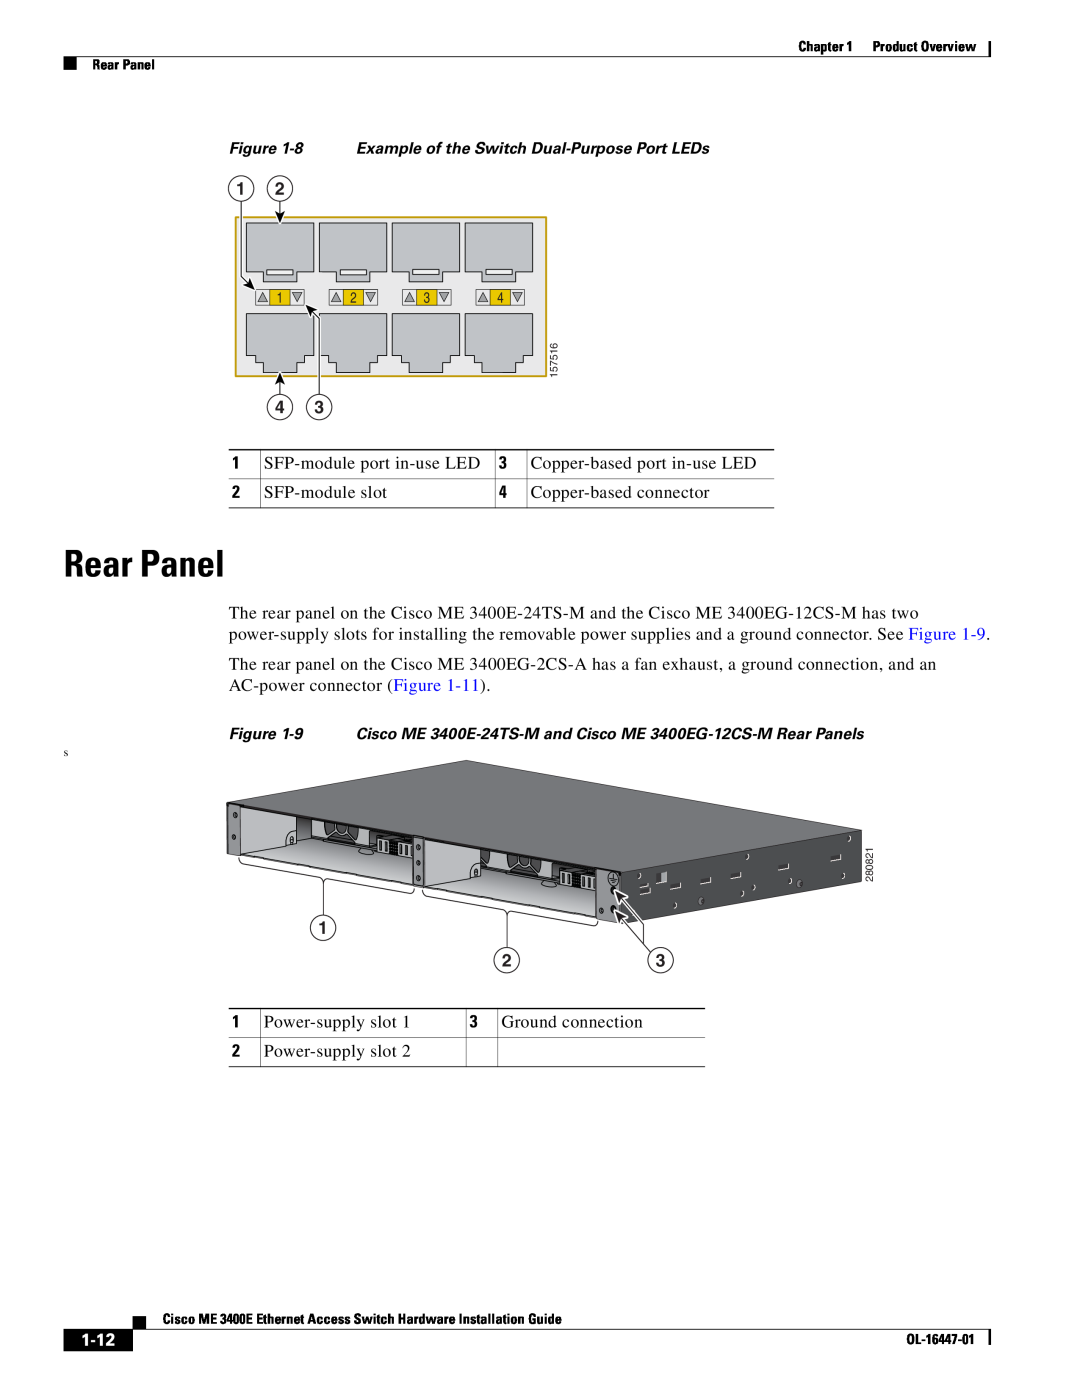 Cisco Systems OL-16447-01 manual Rear Panel, 1-12, 8 Example of the Switch Dual-Purpose Port LEDs 